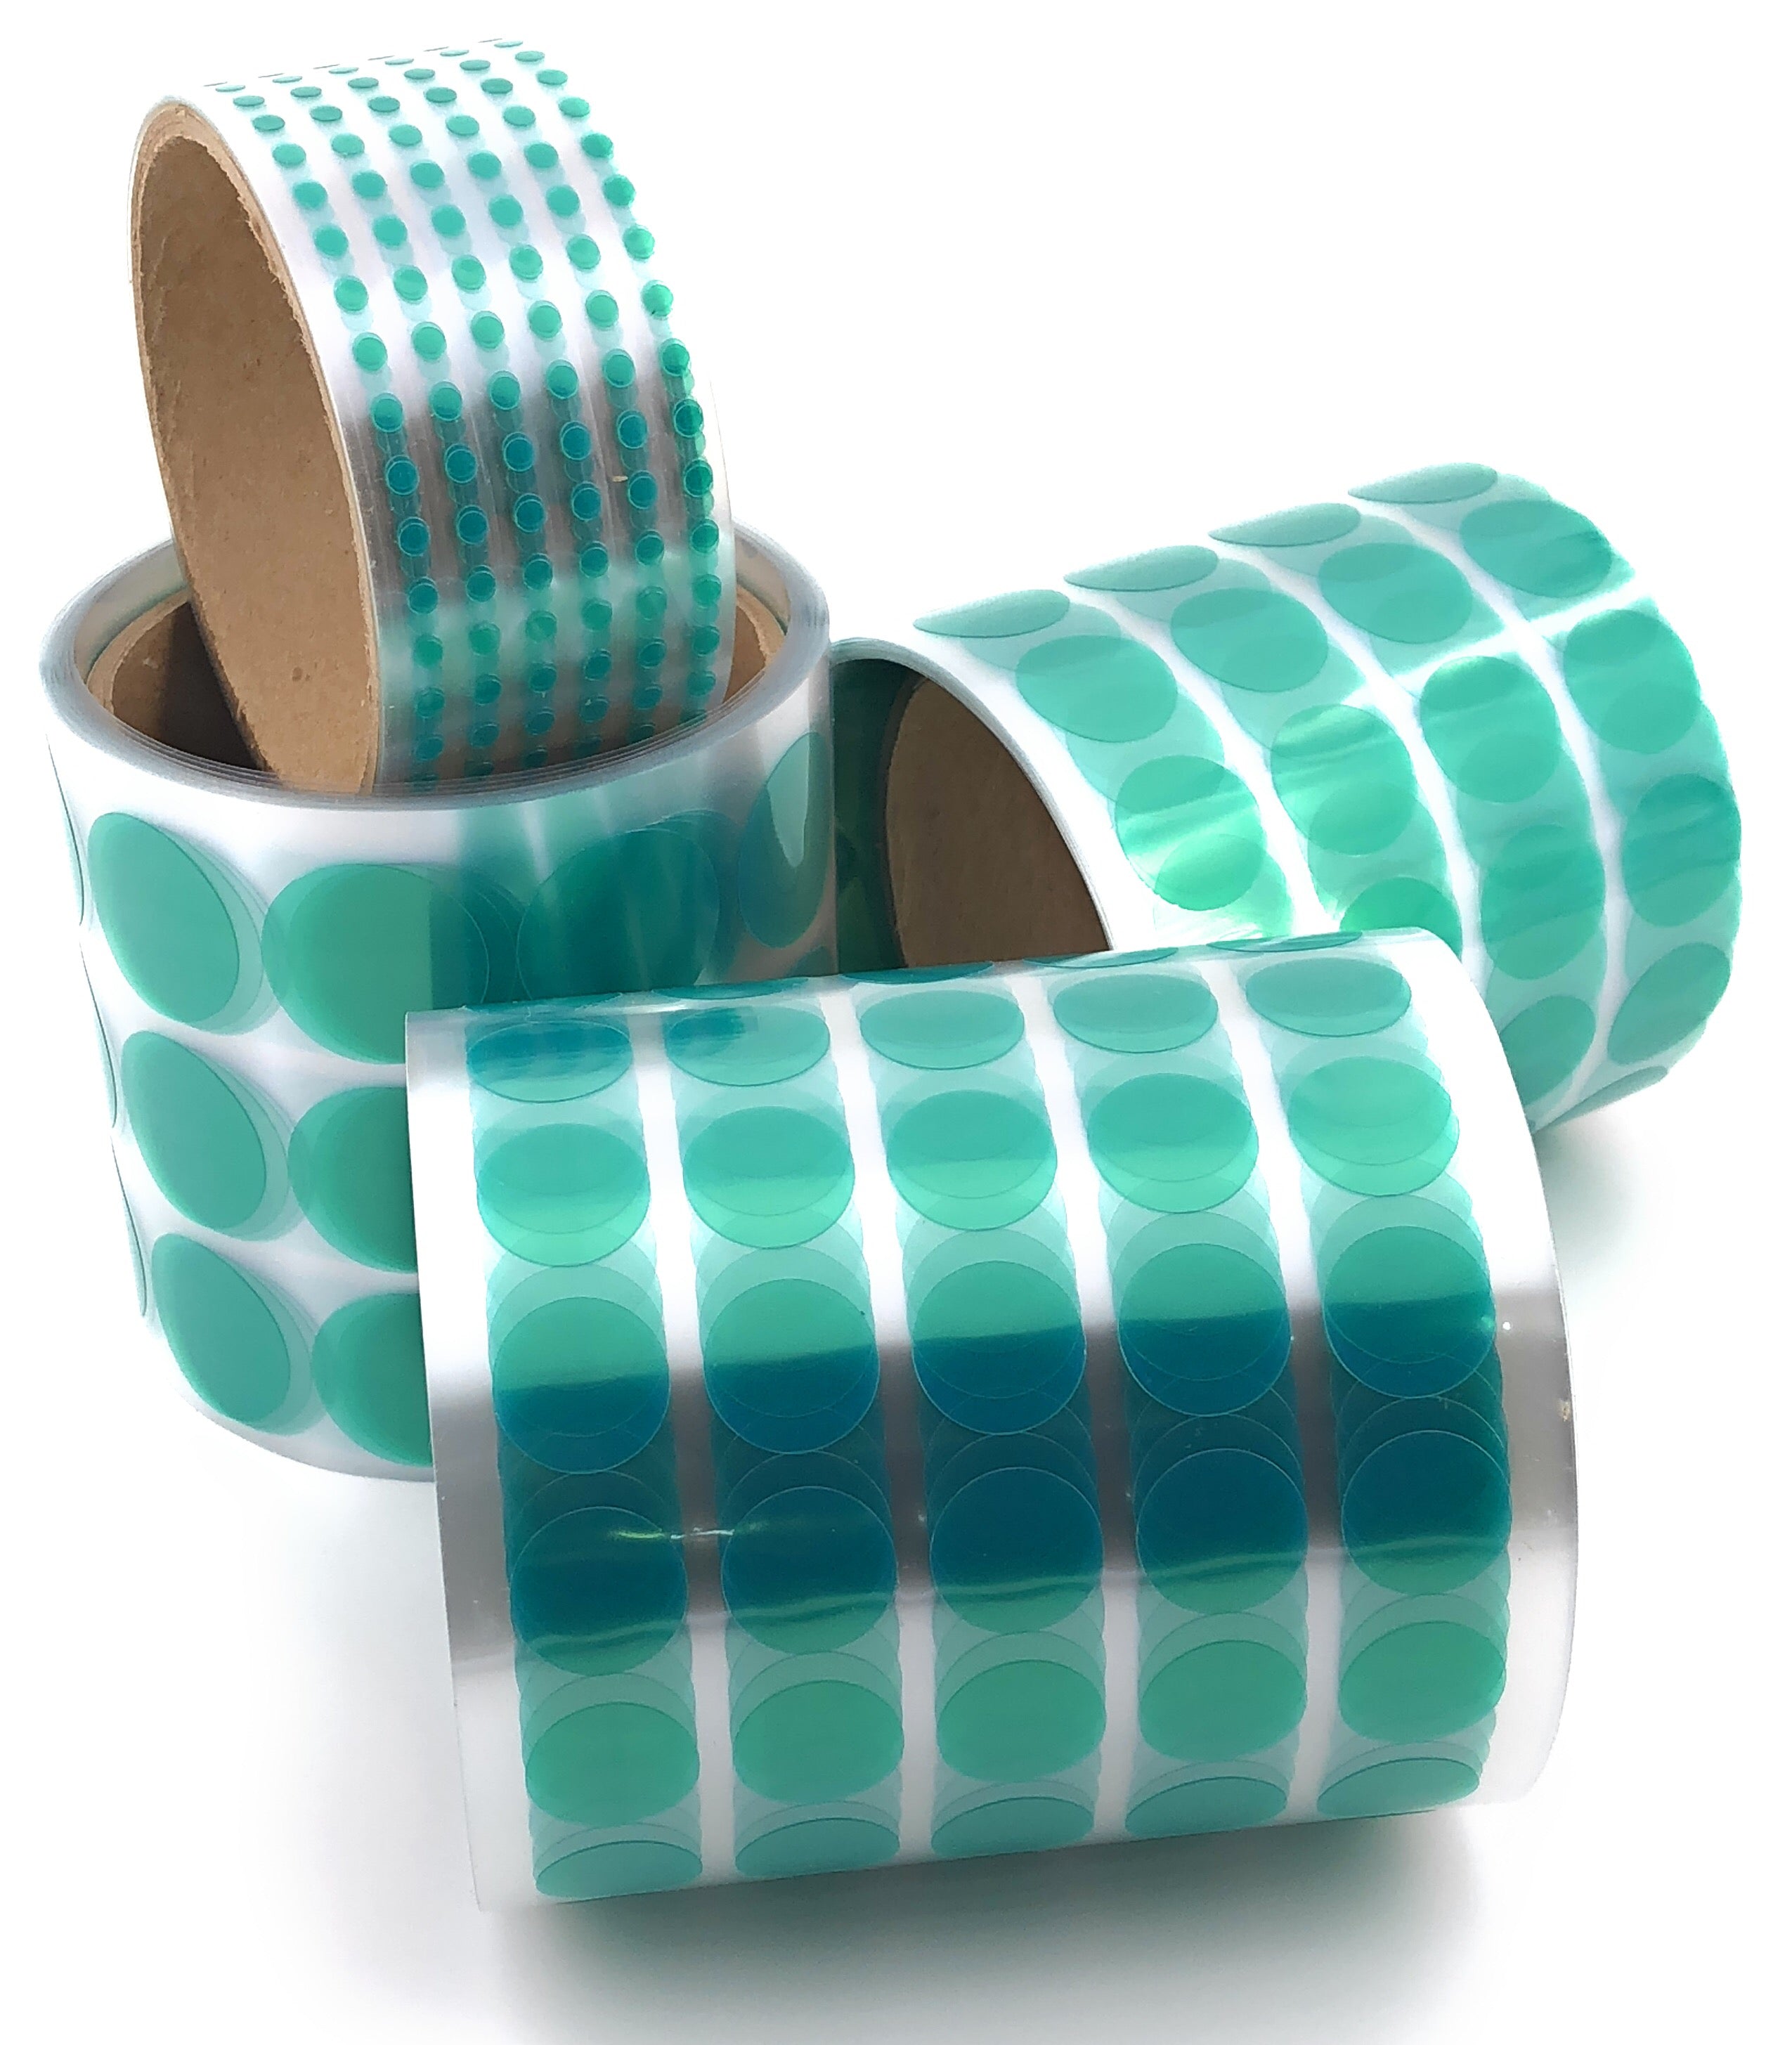 WOD PFT35GS High Temperature Polyester Green Masking Pet Tape. 3 inch x 72  yds. For Powder Coating, E-Coating or Plating Projects. Up to 350 F  Resistance, Heat and Fireproof. 